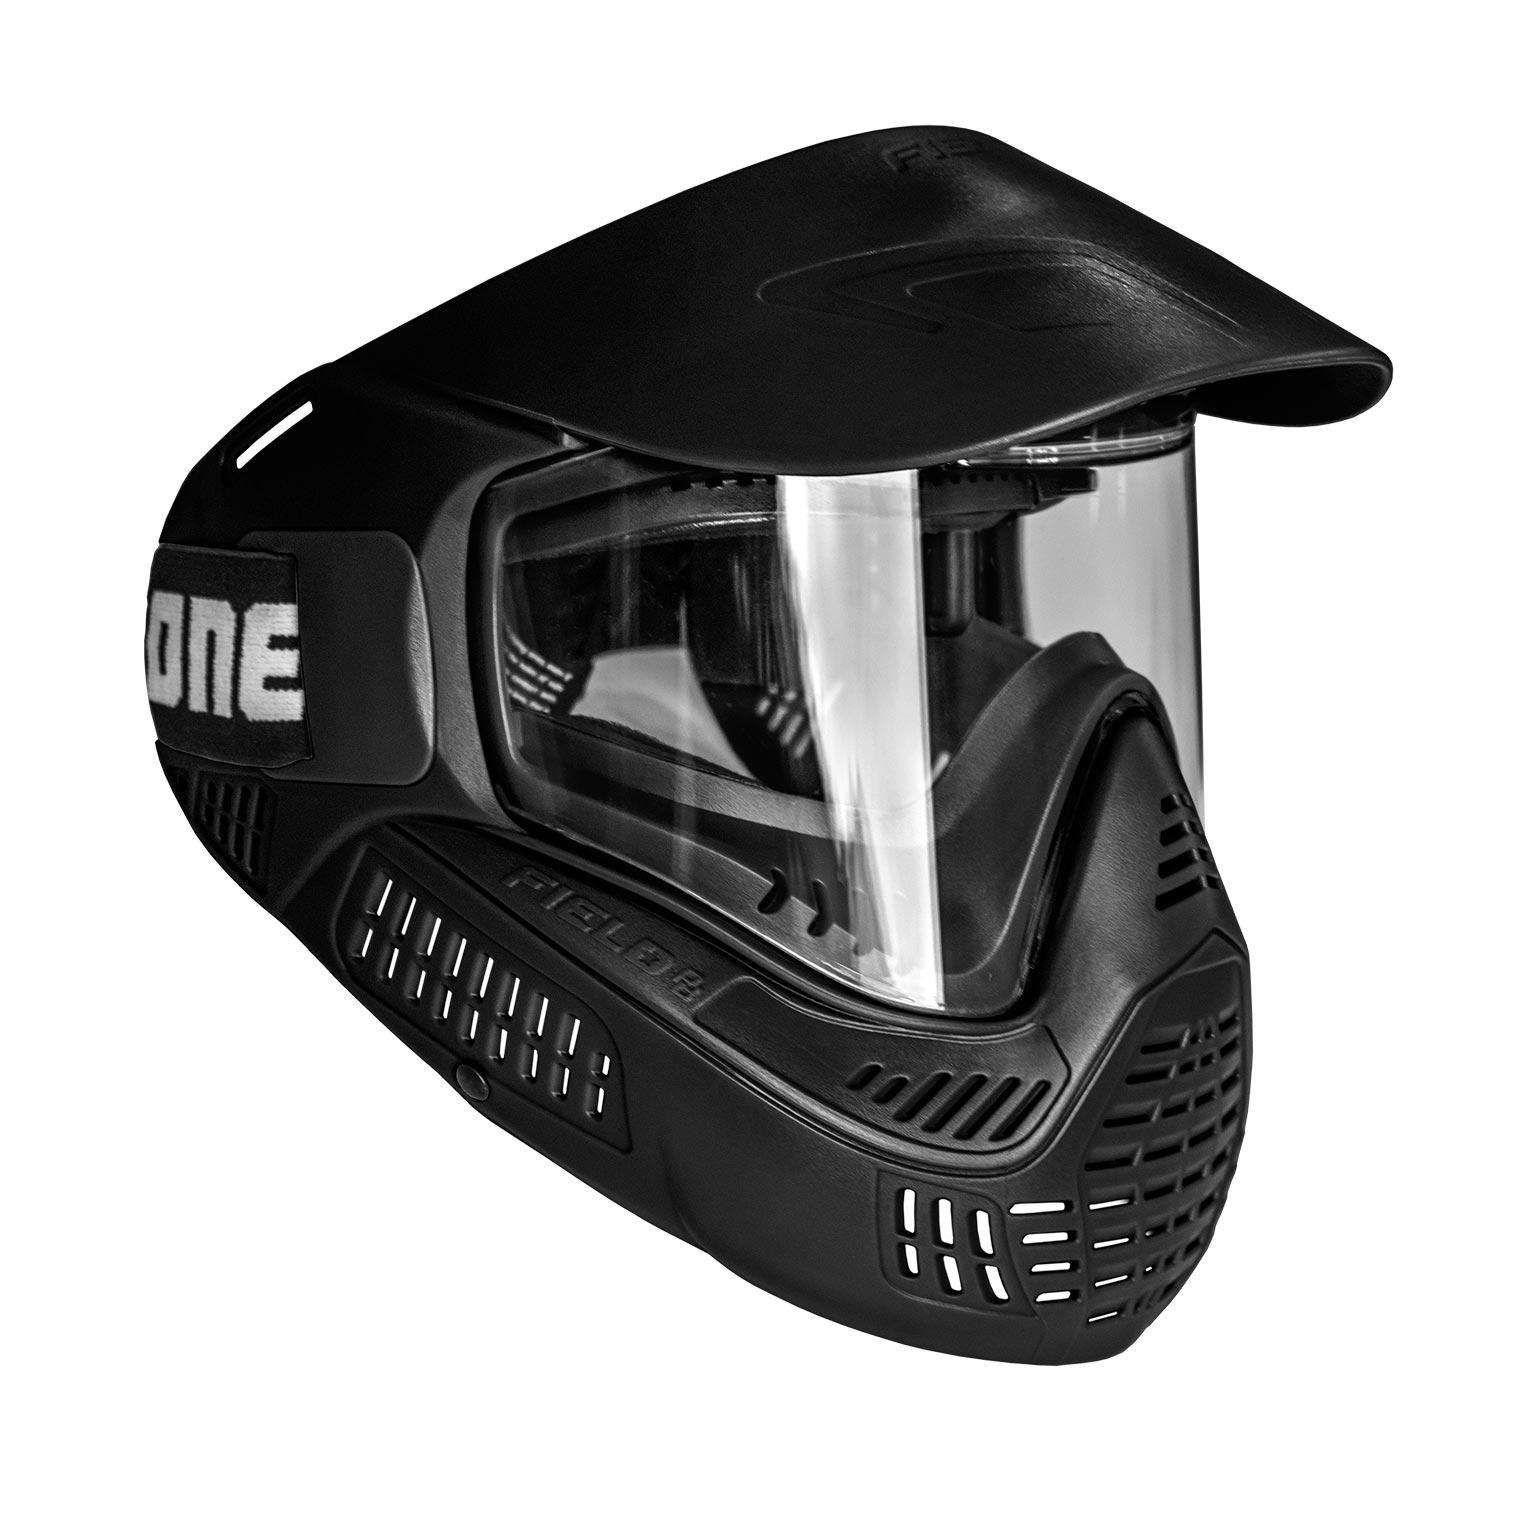 Paintball Mask # ONE Black Single Lens W/ Top Strap- Free 2/4 Day Shipping.*